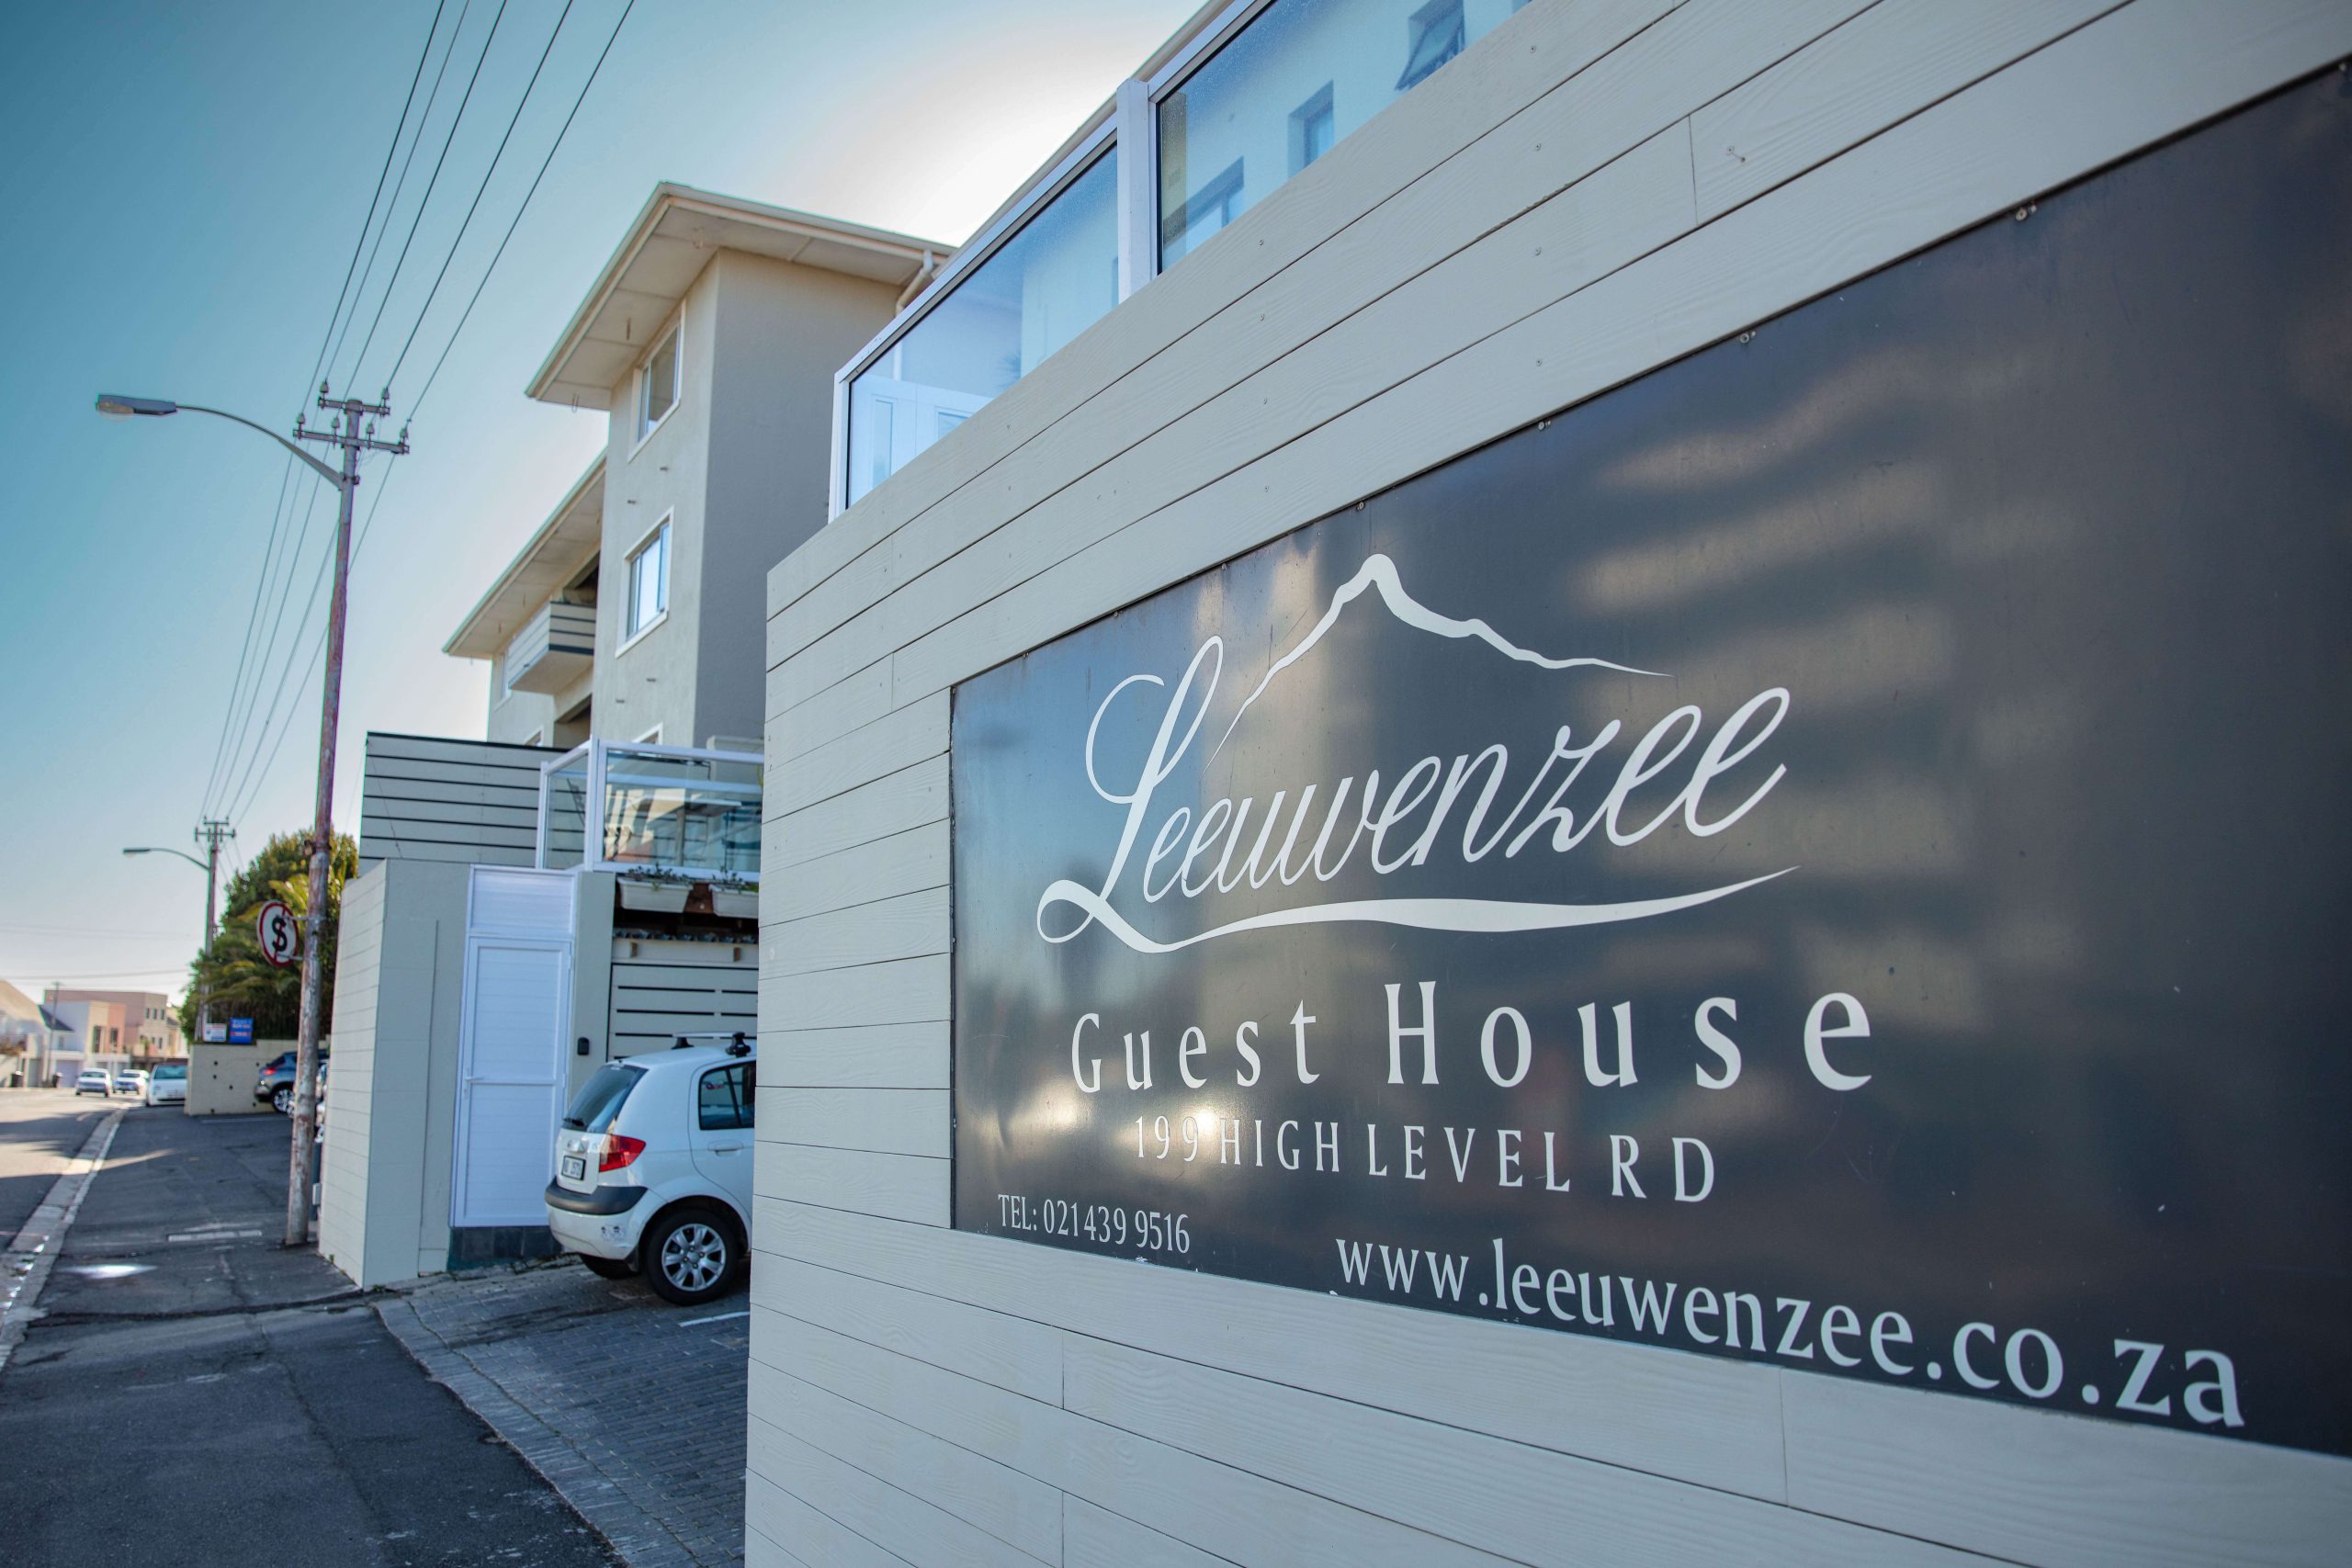 Leeuwenzee Guest House B&B in Sea Point, Cape Town